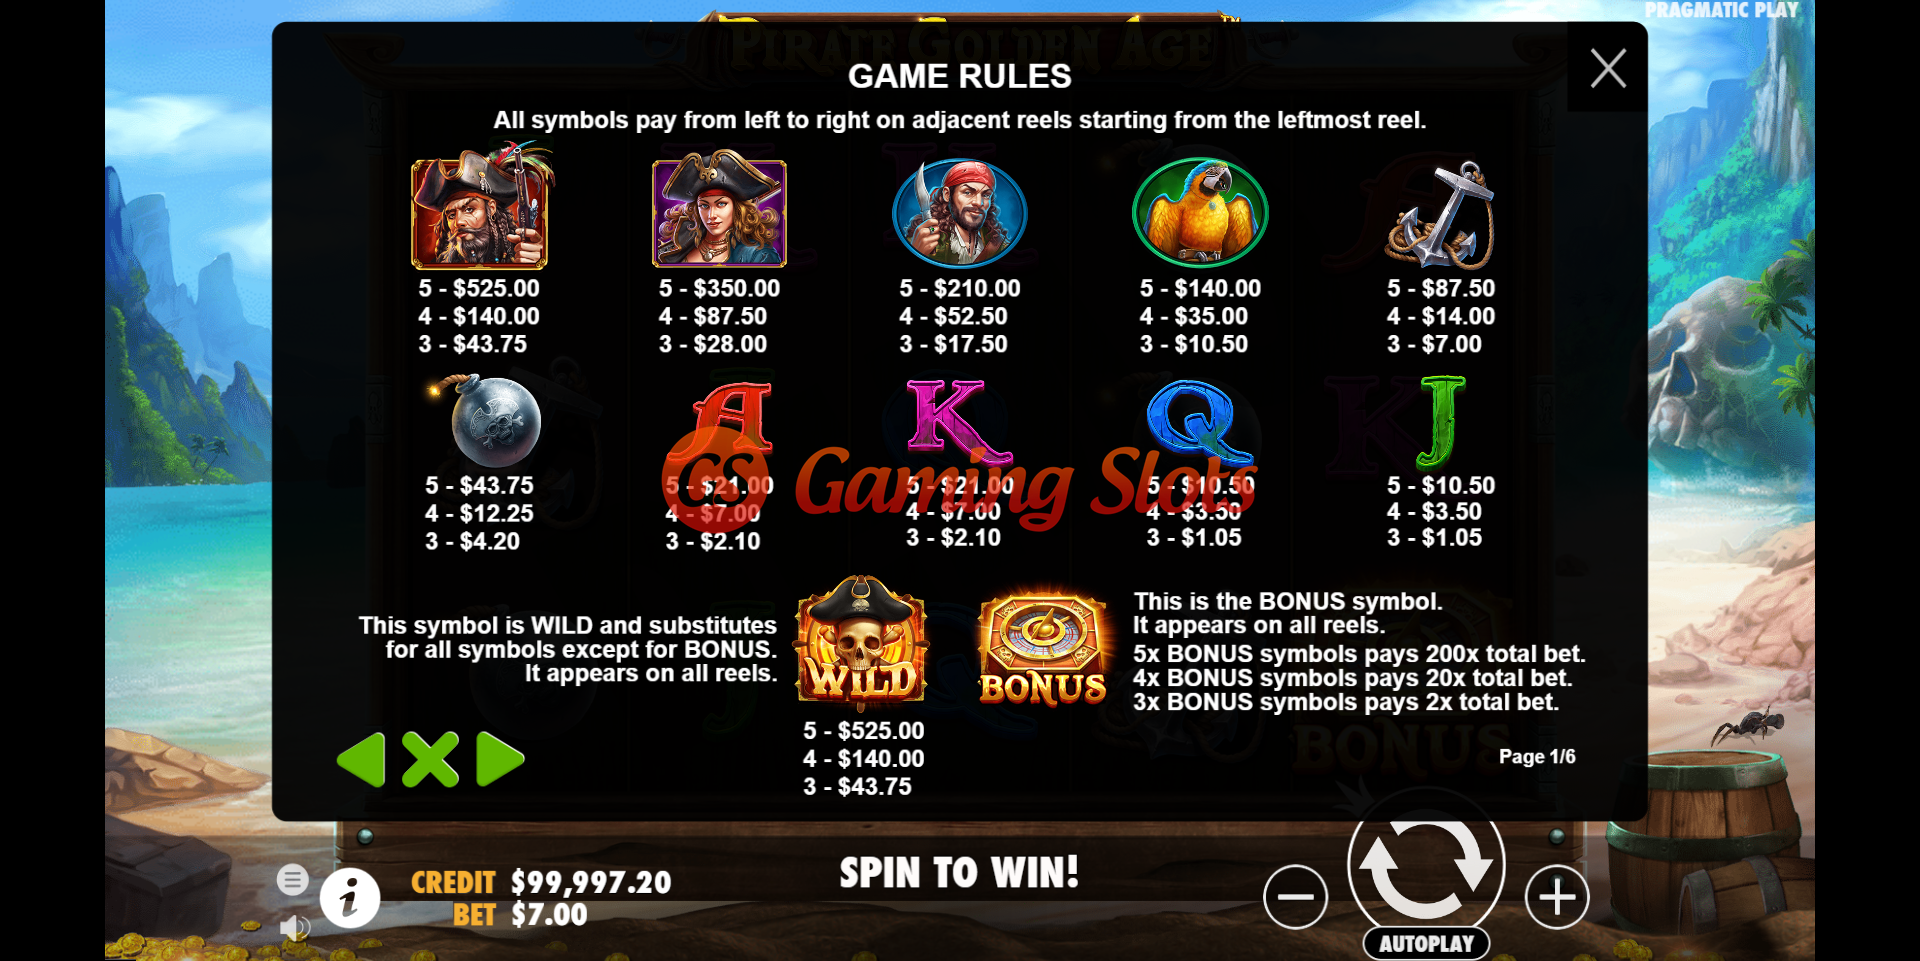 Game Rules for Pirate Golden Age slot from Pragmatic Play